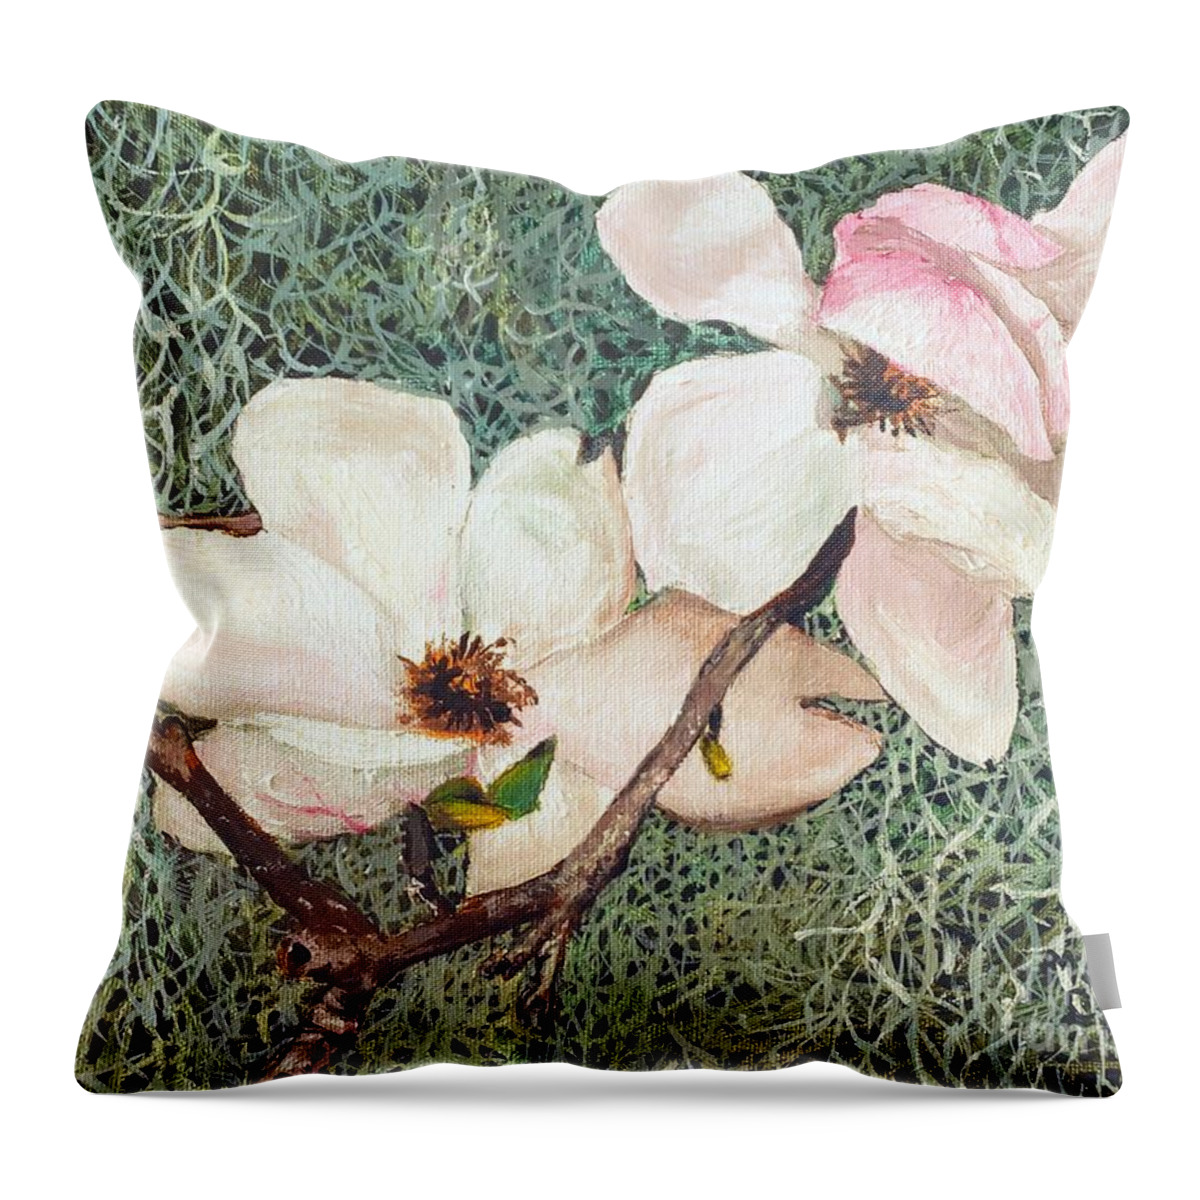 South Throw Pillow featuring the painting Southern Dogwood by Merana Cadorette